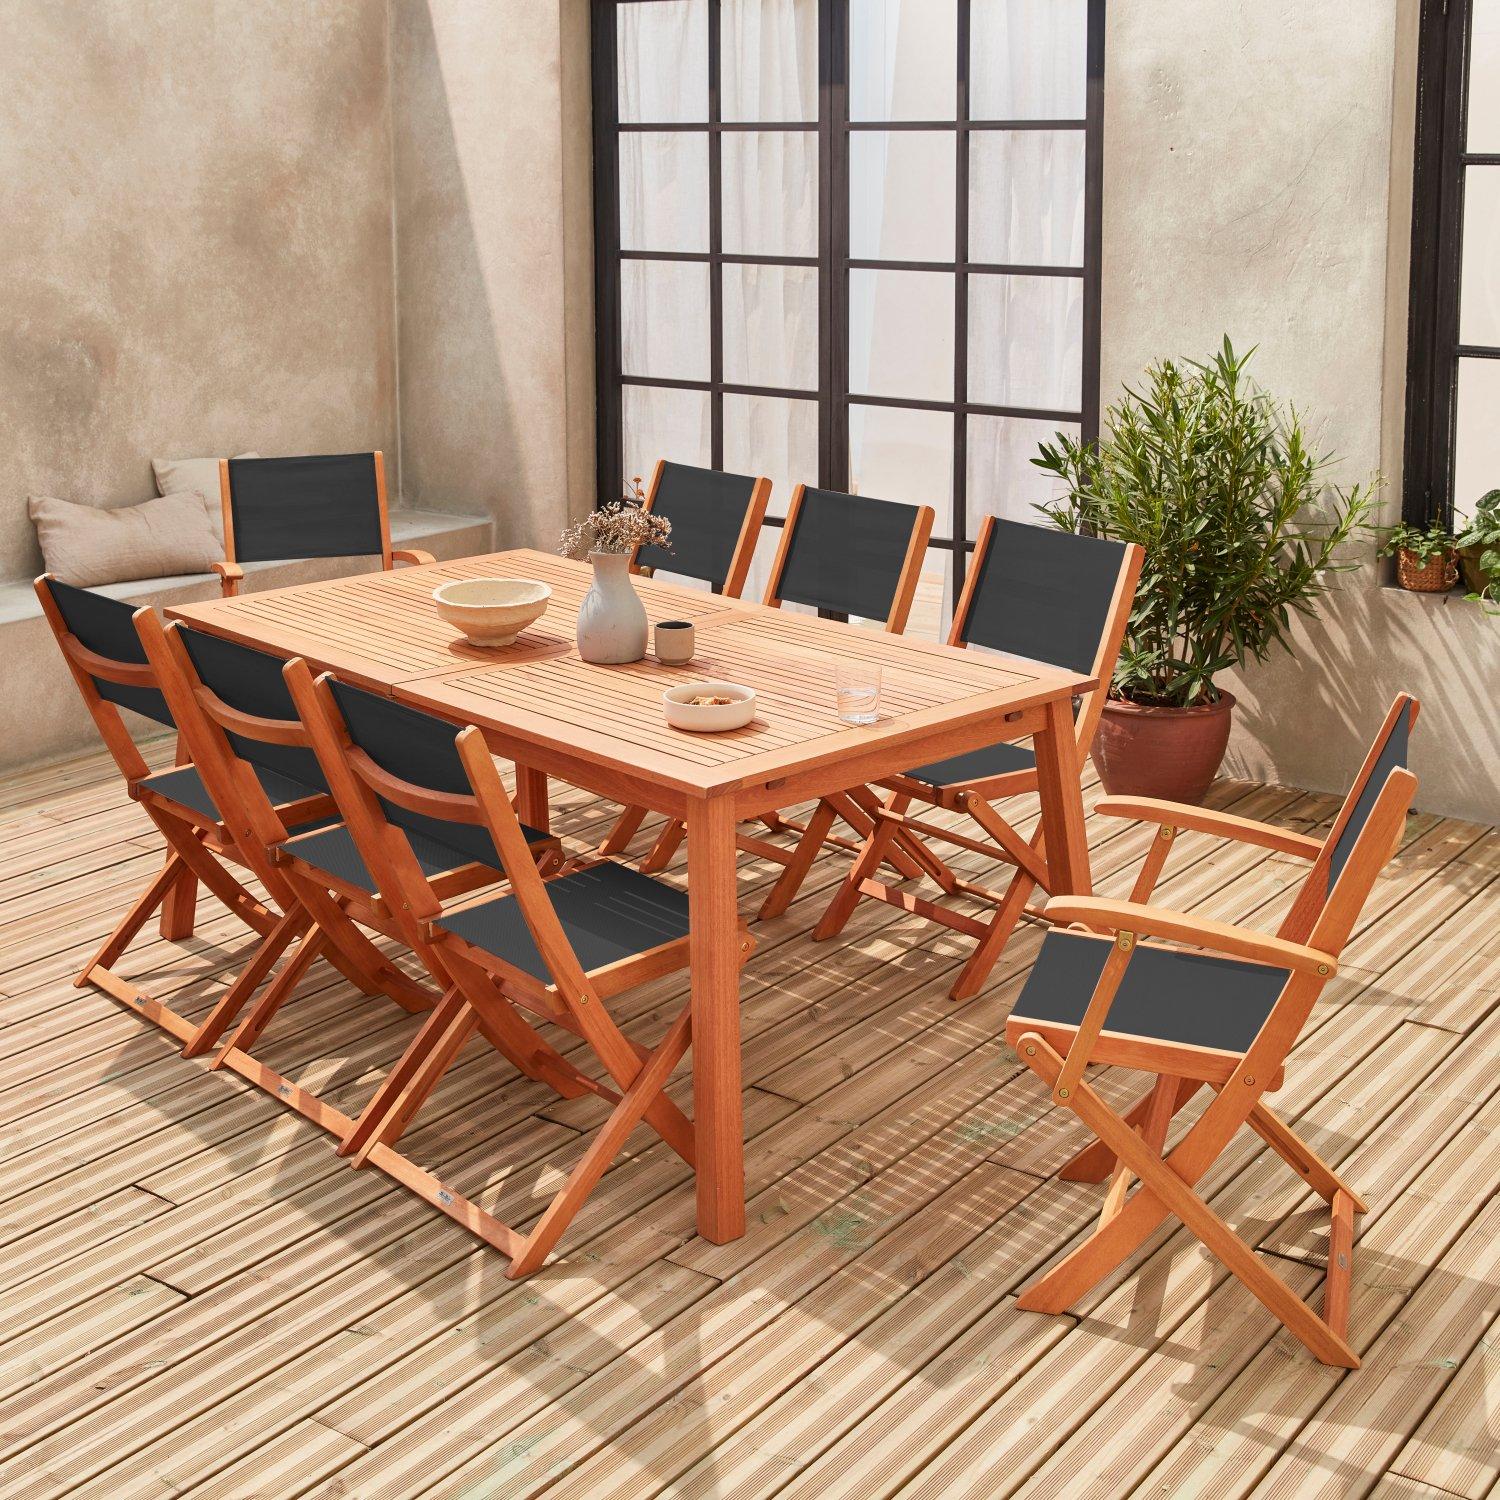 8-seater Extendable Wooden Garden Table Set With Chairs